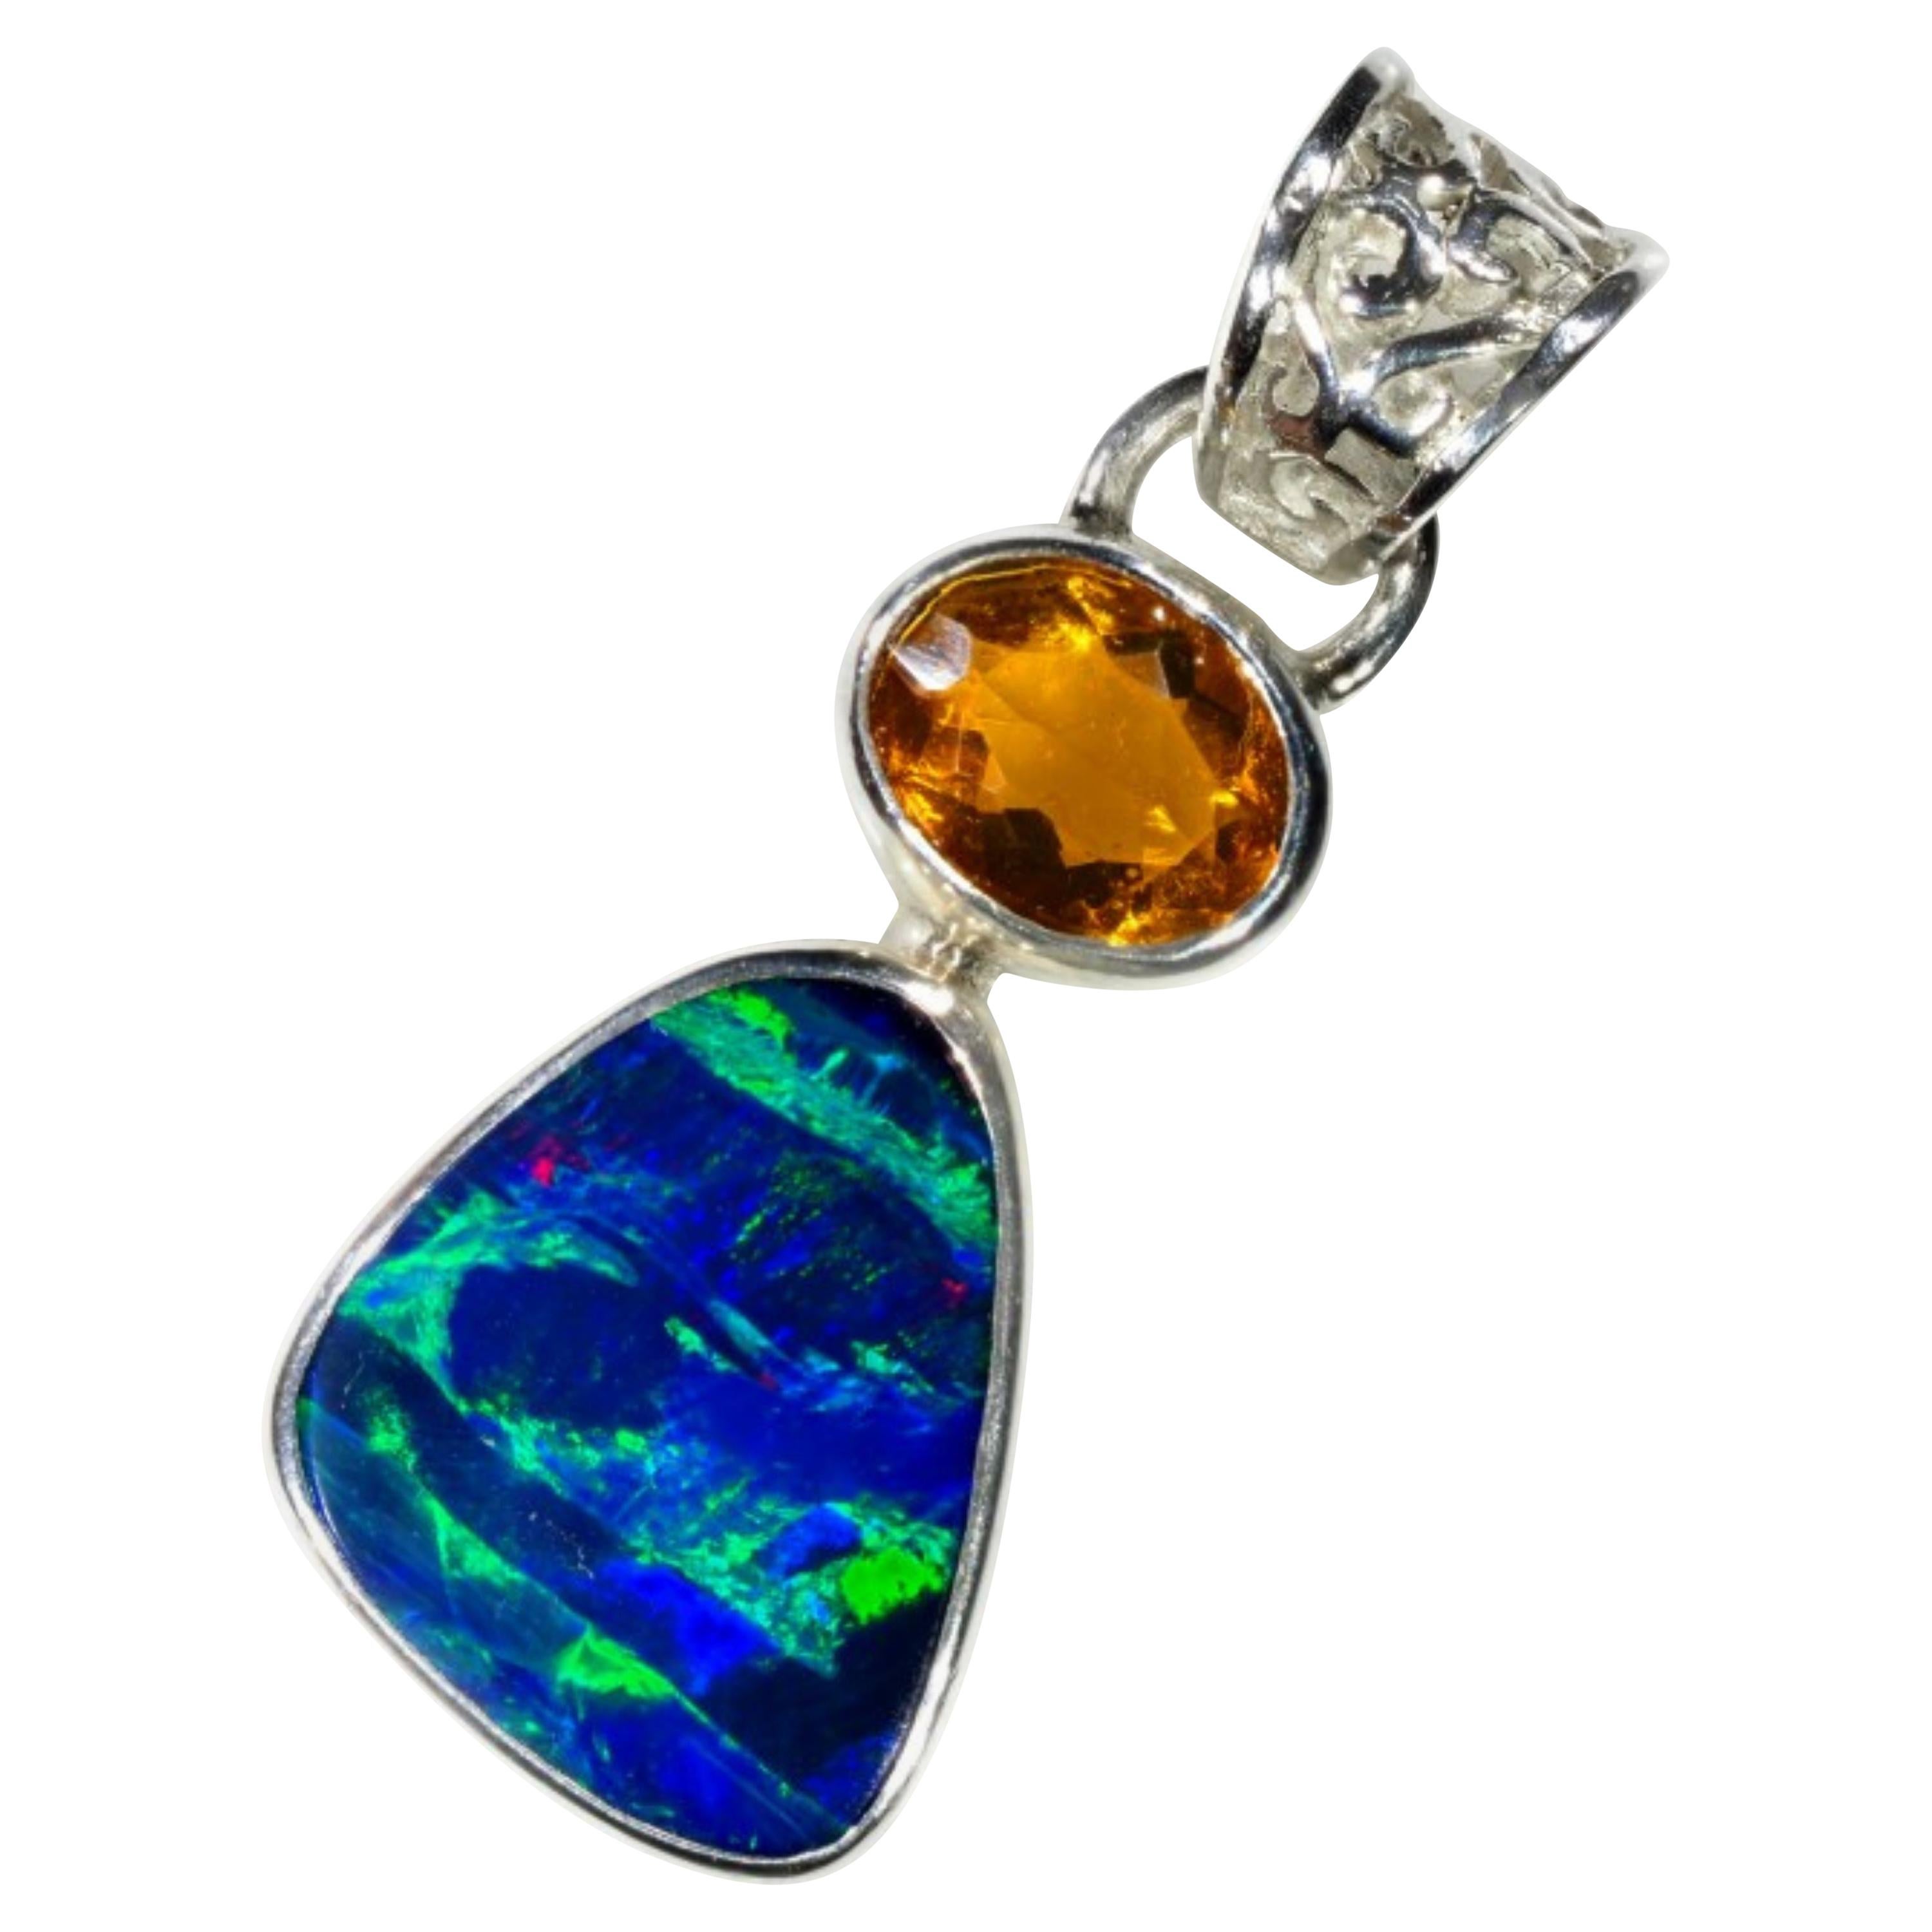 Australian and Mexican Opal Necklace Sterling Silver